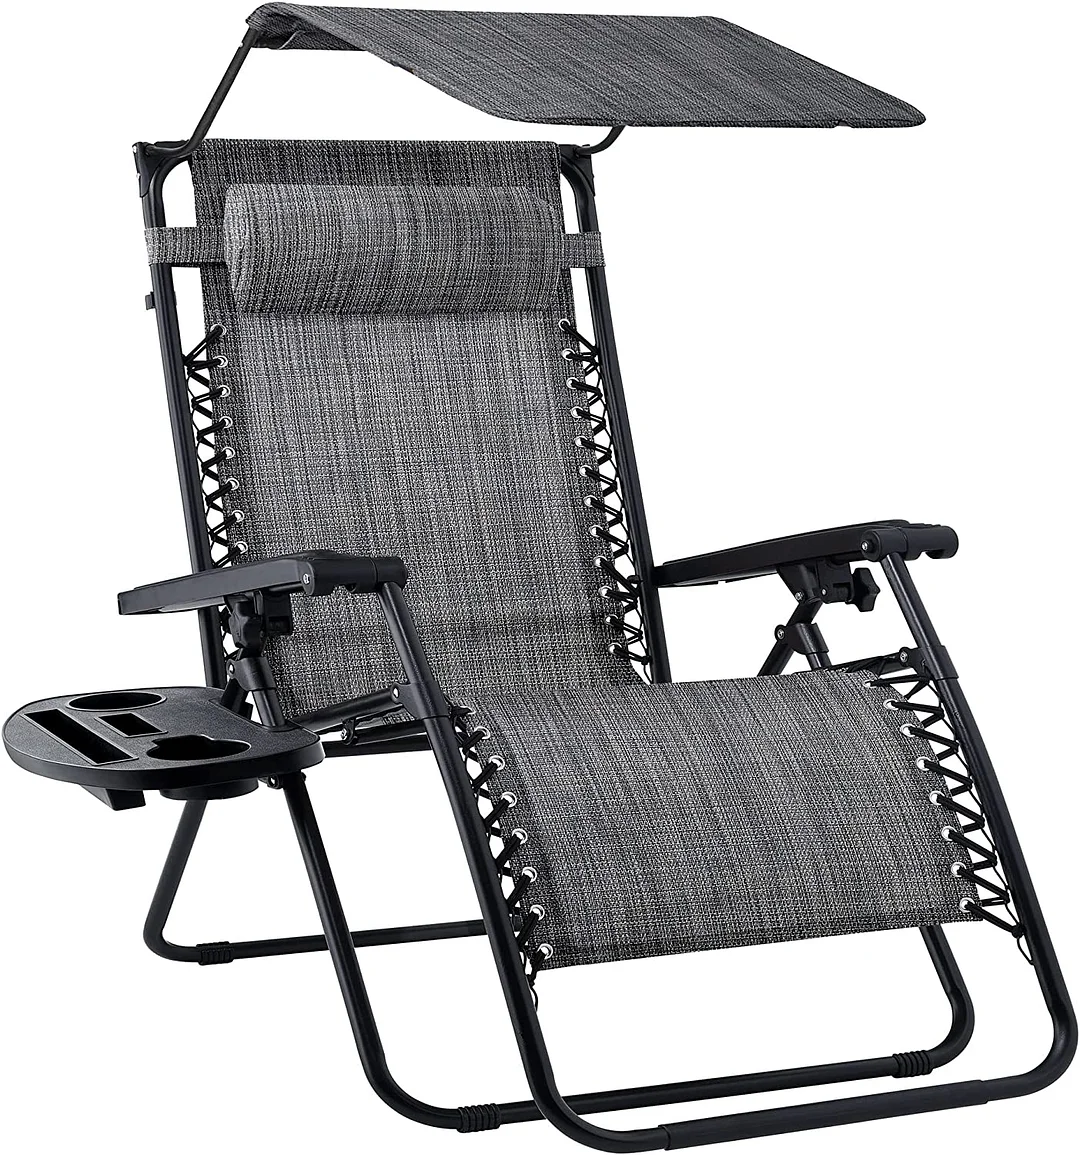 Folding Zero Gravity Outdoor Recliner Patio Lounge Chair w/Adjustable Canopy Shade, Headrest, Side Accessory Tray